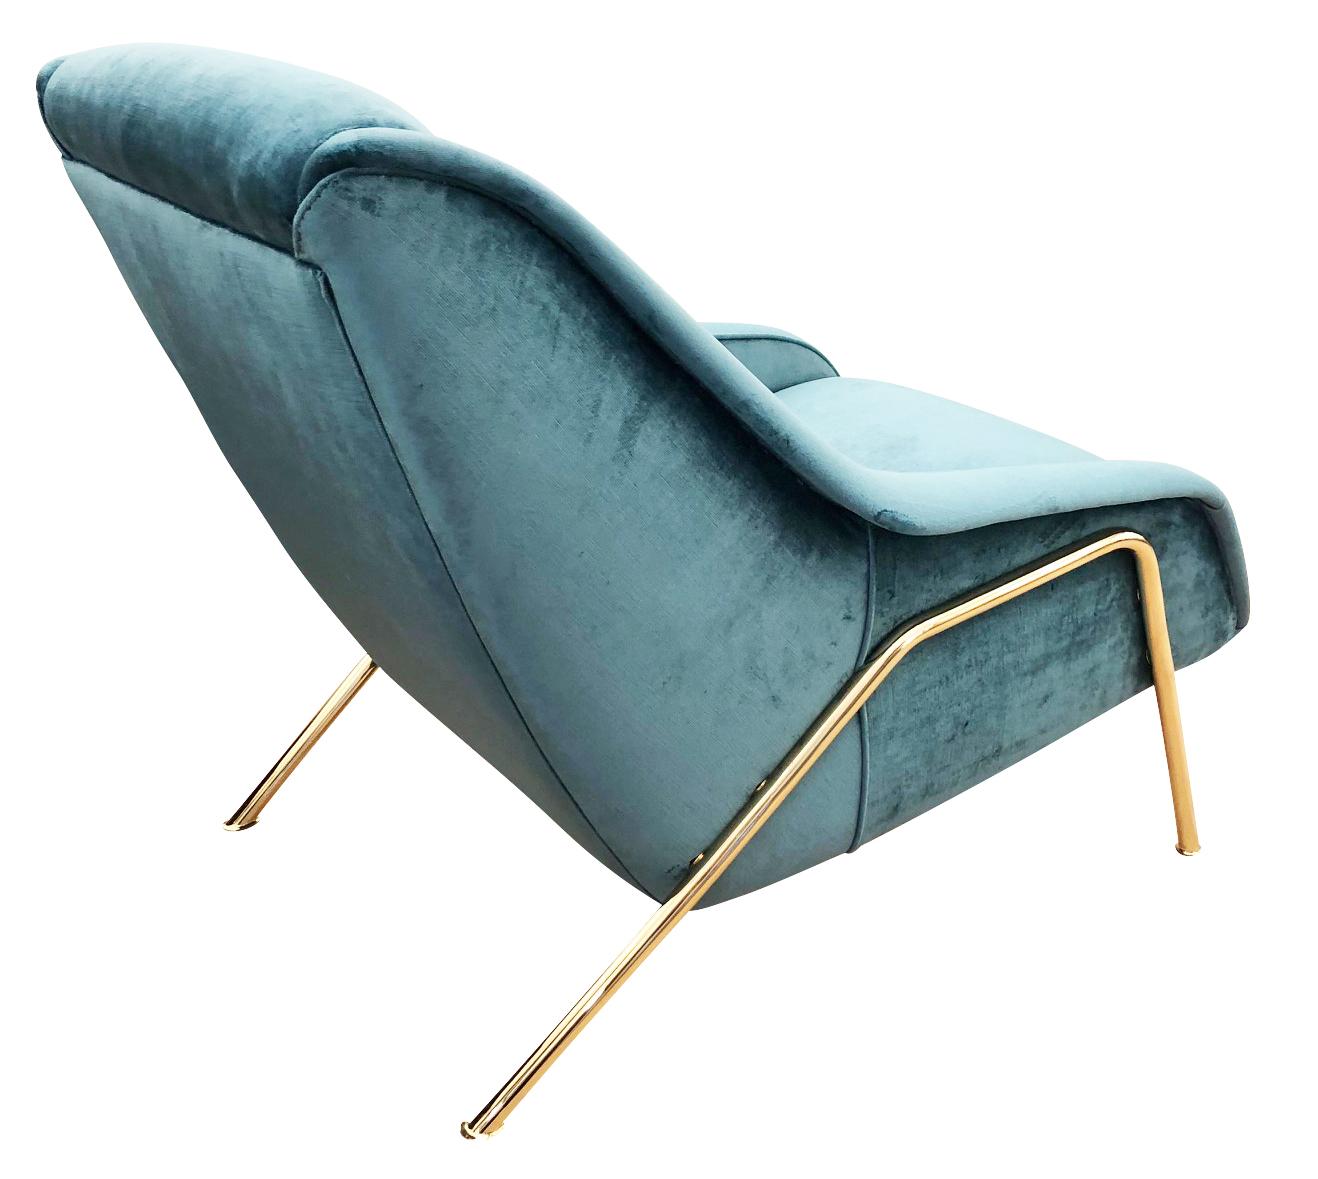 Sleek Italian midcentury lounge chair with brass legs. Upholstered in a blue velvet

Condition: Minor wear to the fabric

Measures: Width 30”

Depth 37”

Height 32.5”

Seat height 16.5”.

  